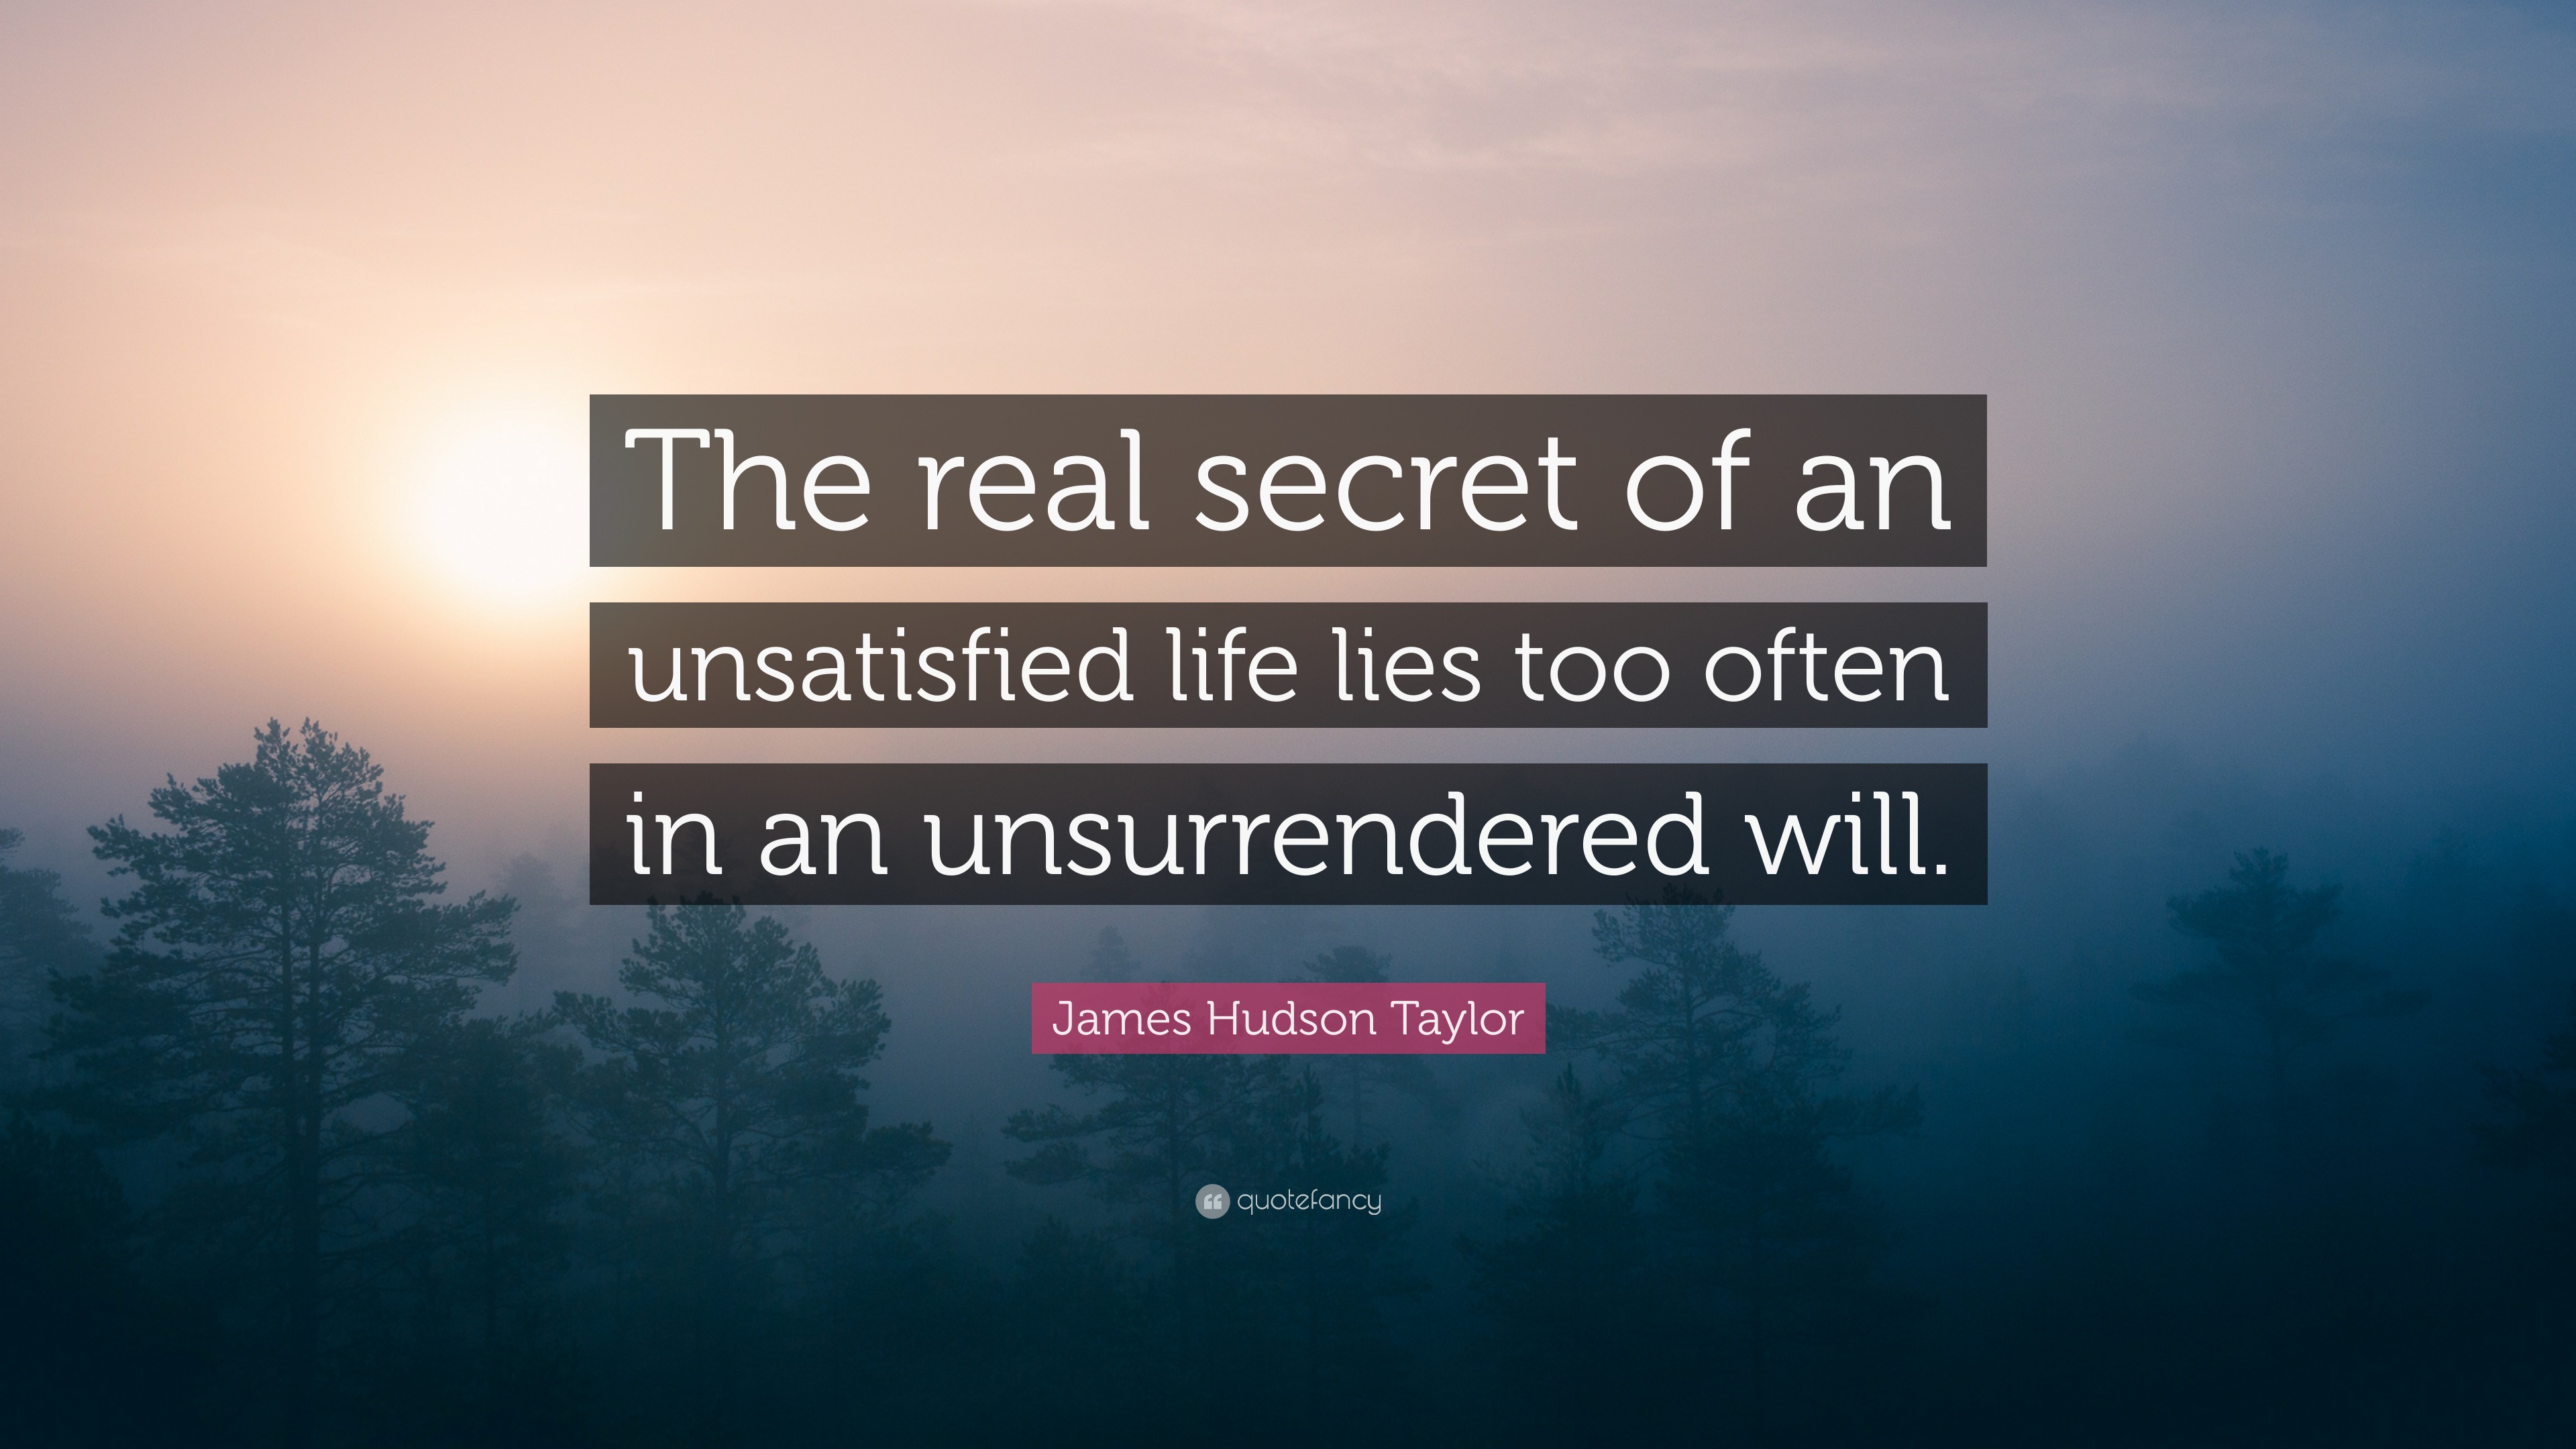 James Hudson Taylor Quote “The real secret of an unsatisfied life lies